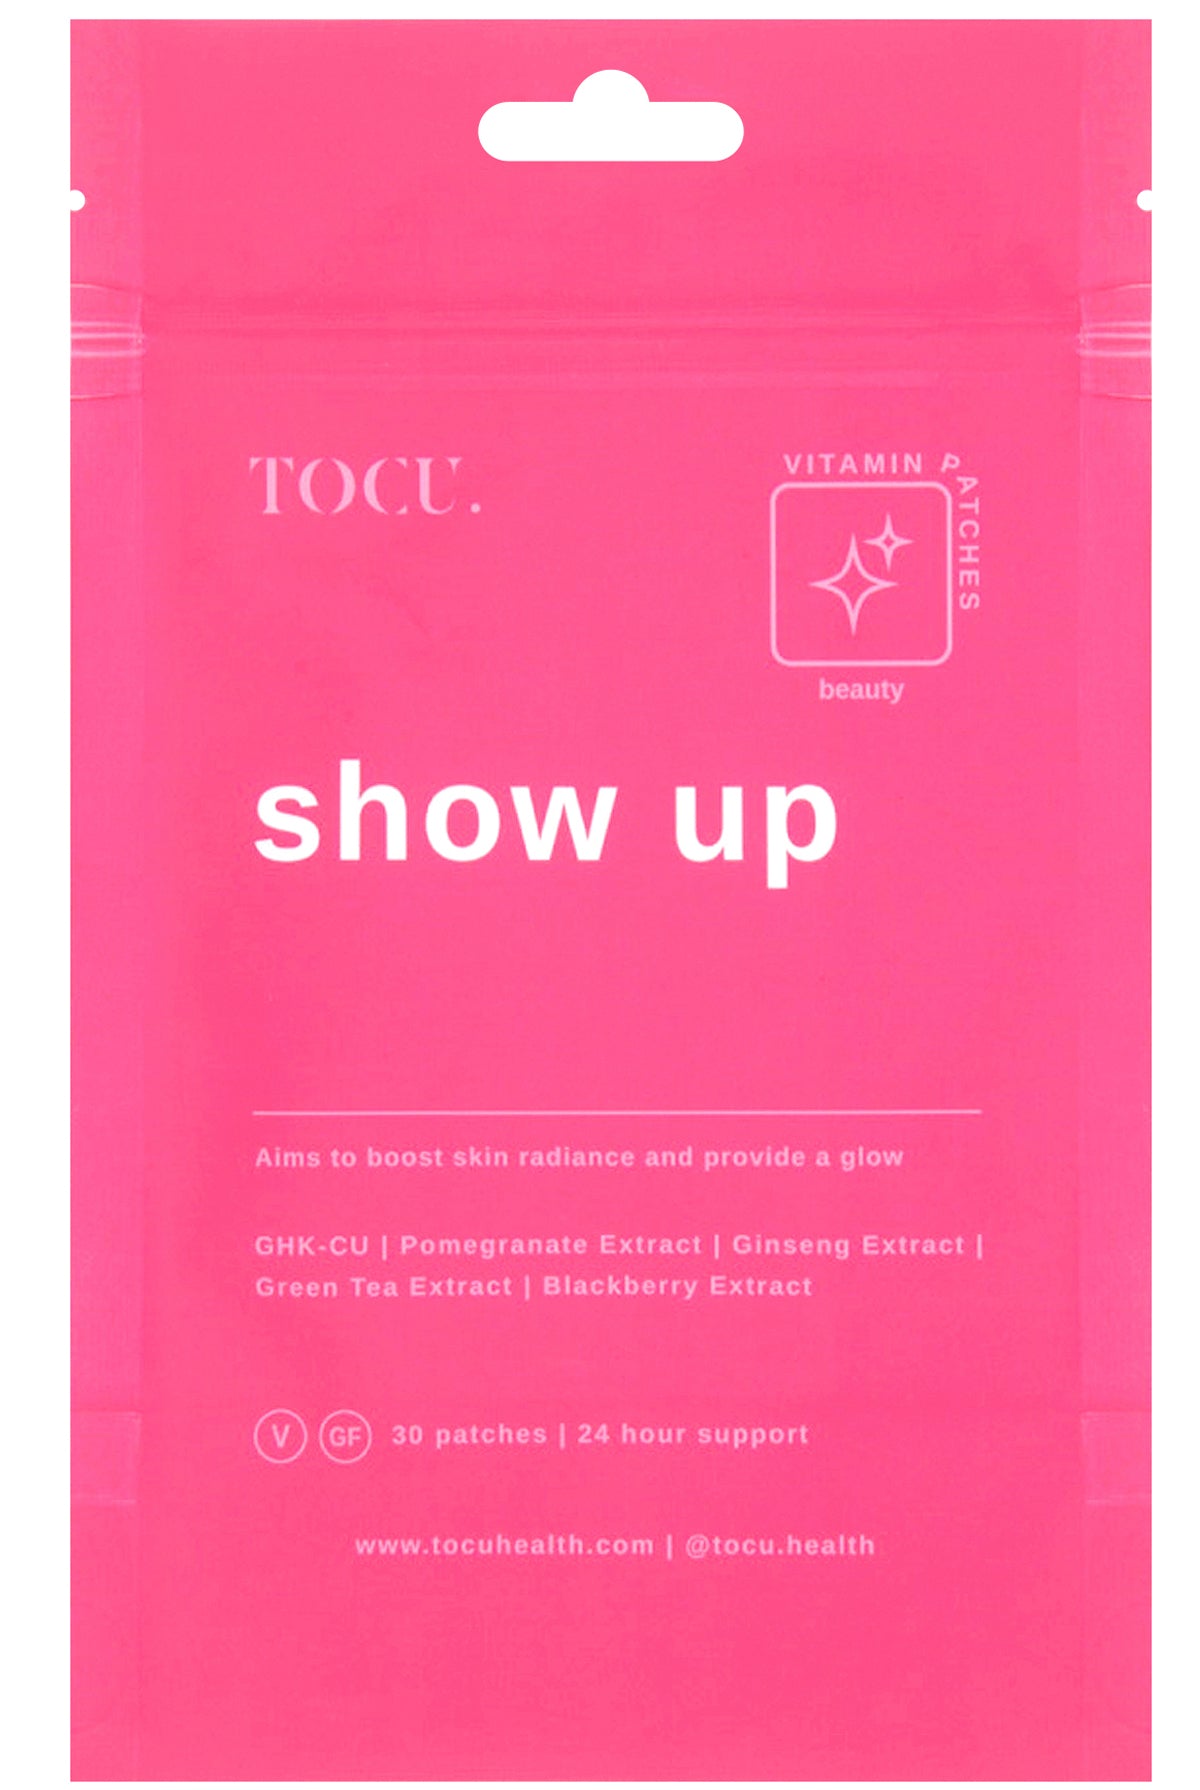 TOCU Show Up Beauty Vitamin Patches - 30 patches